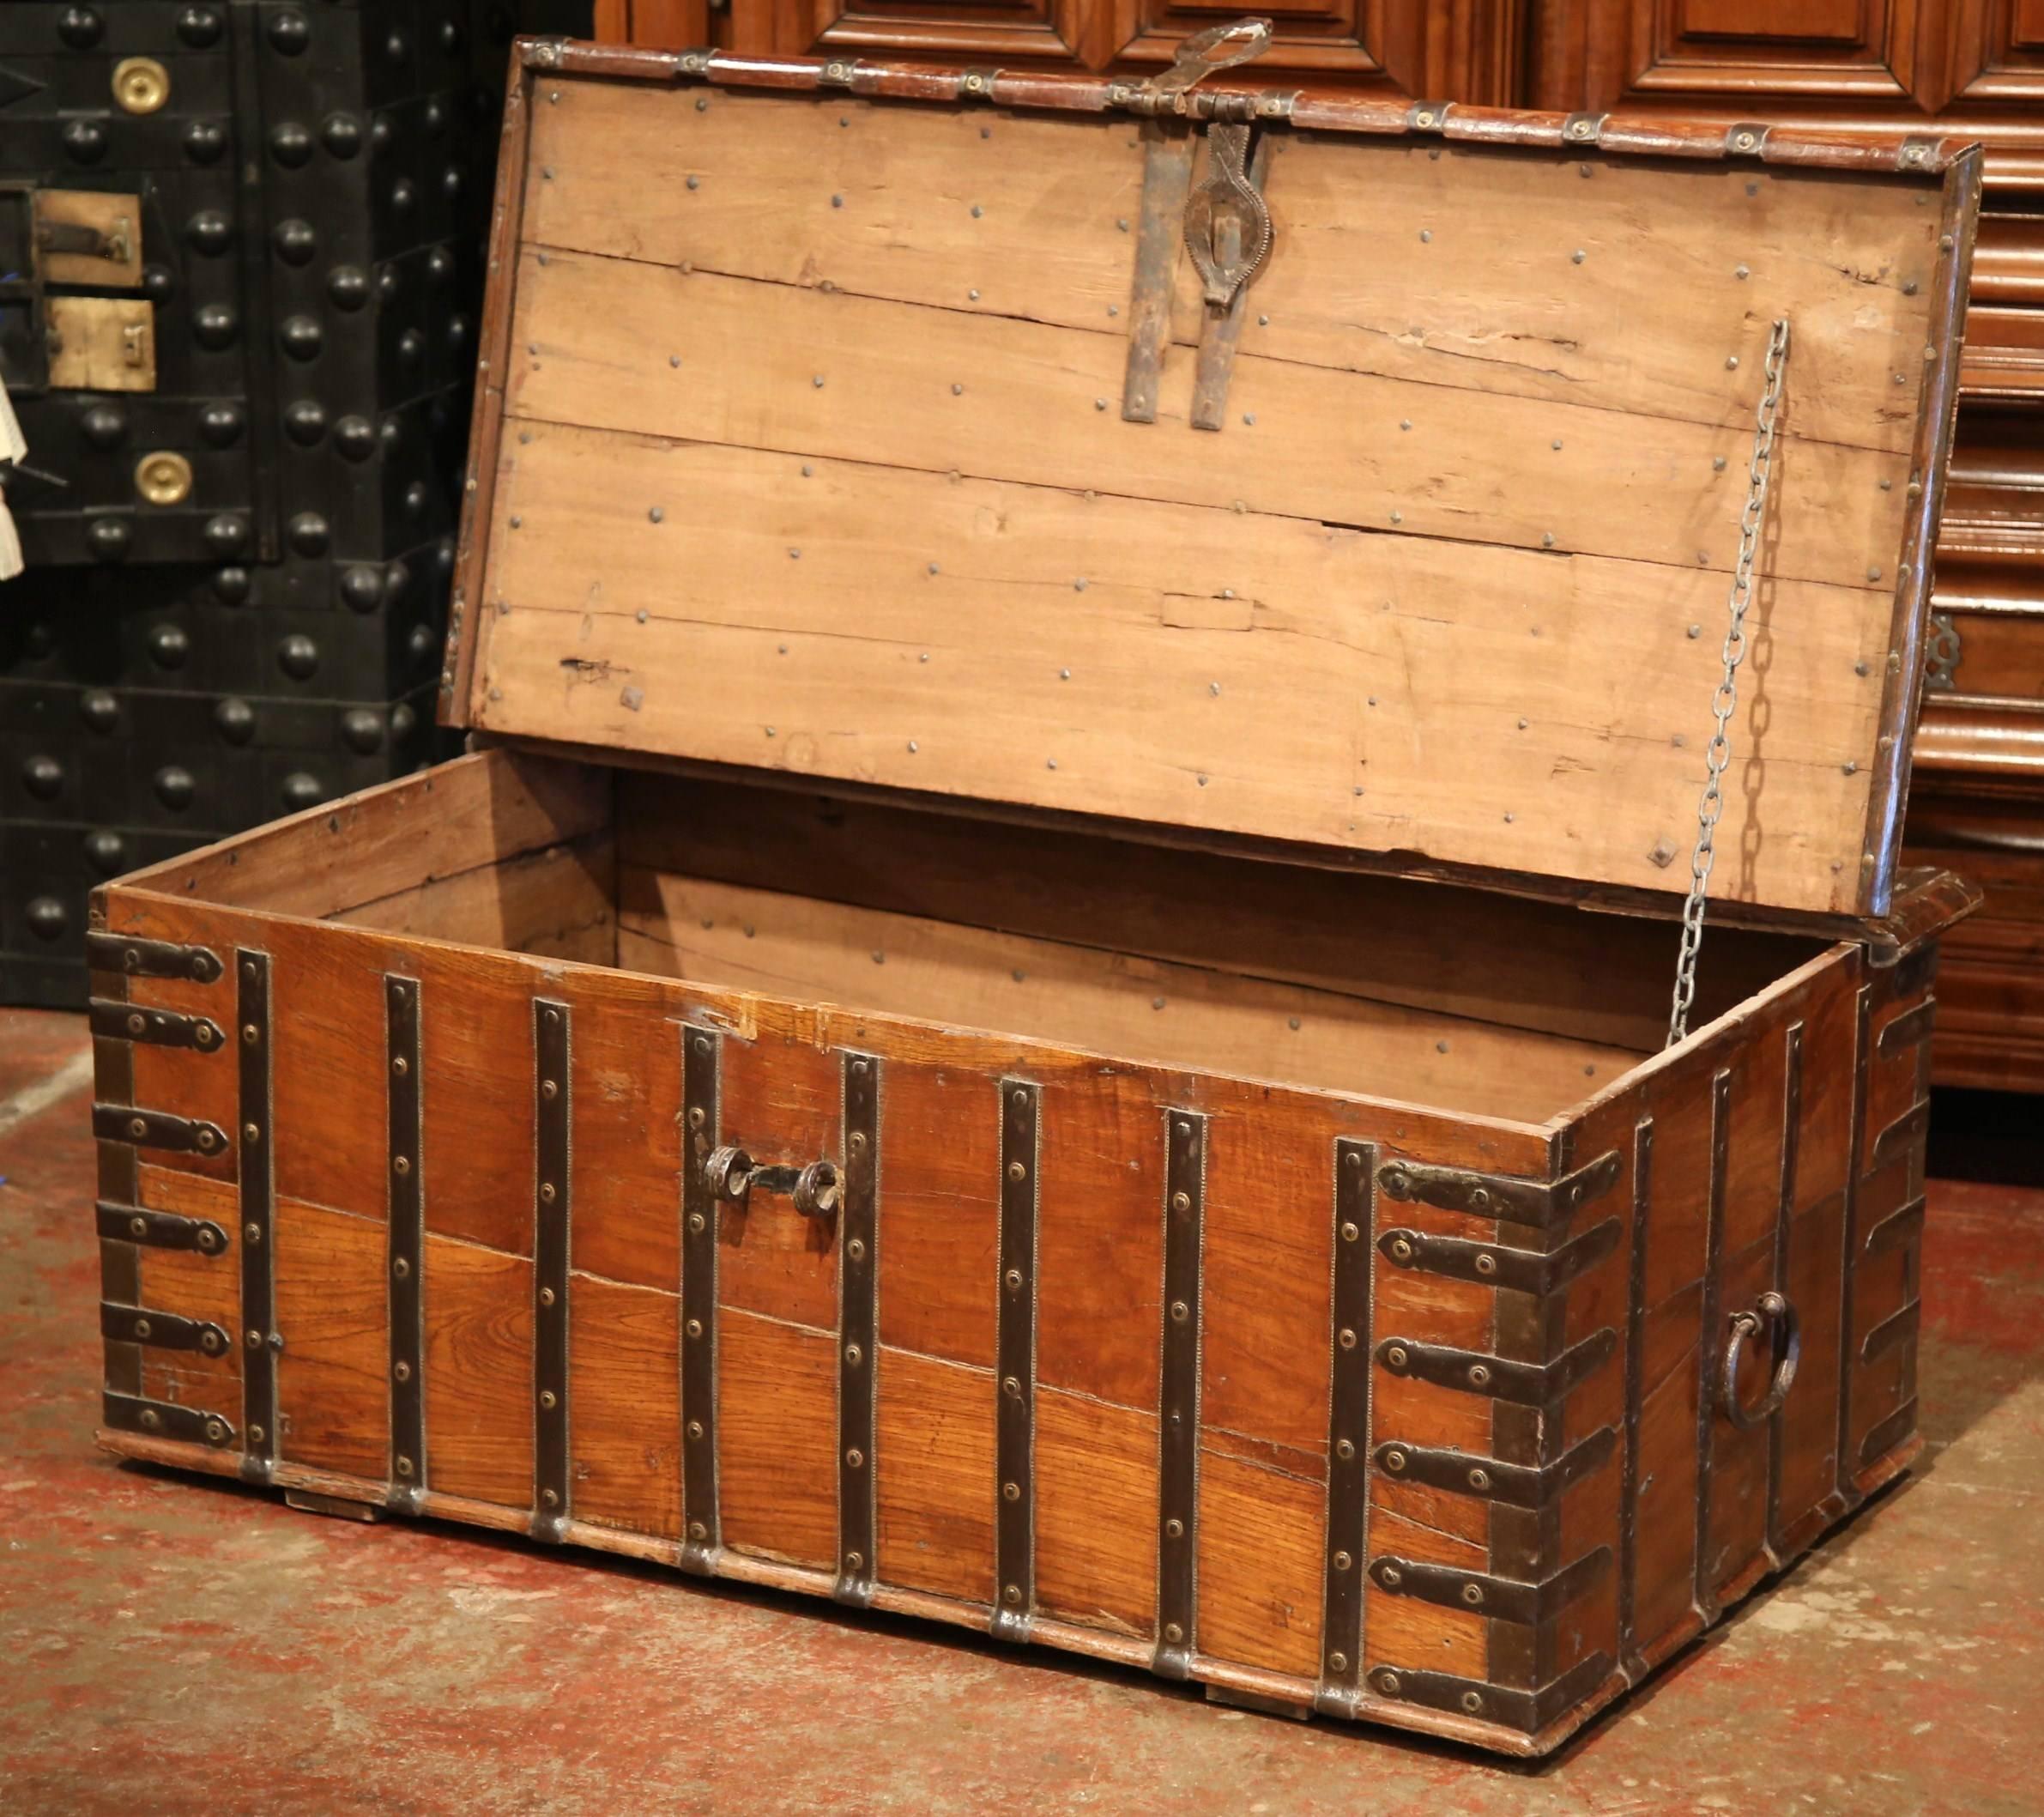 This fruitwood coffee table trunk was crafted in England, circa 1870. The wooden antique blanket chest is finished on all four sides, and has heavy hardware and metal strapping. The piece opens from the top and features a salt box on the inside